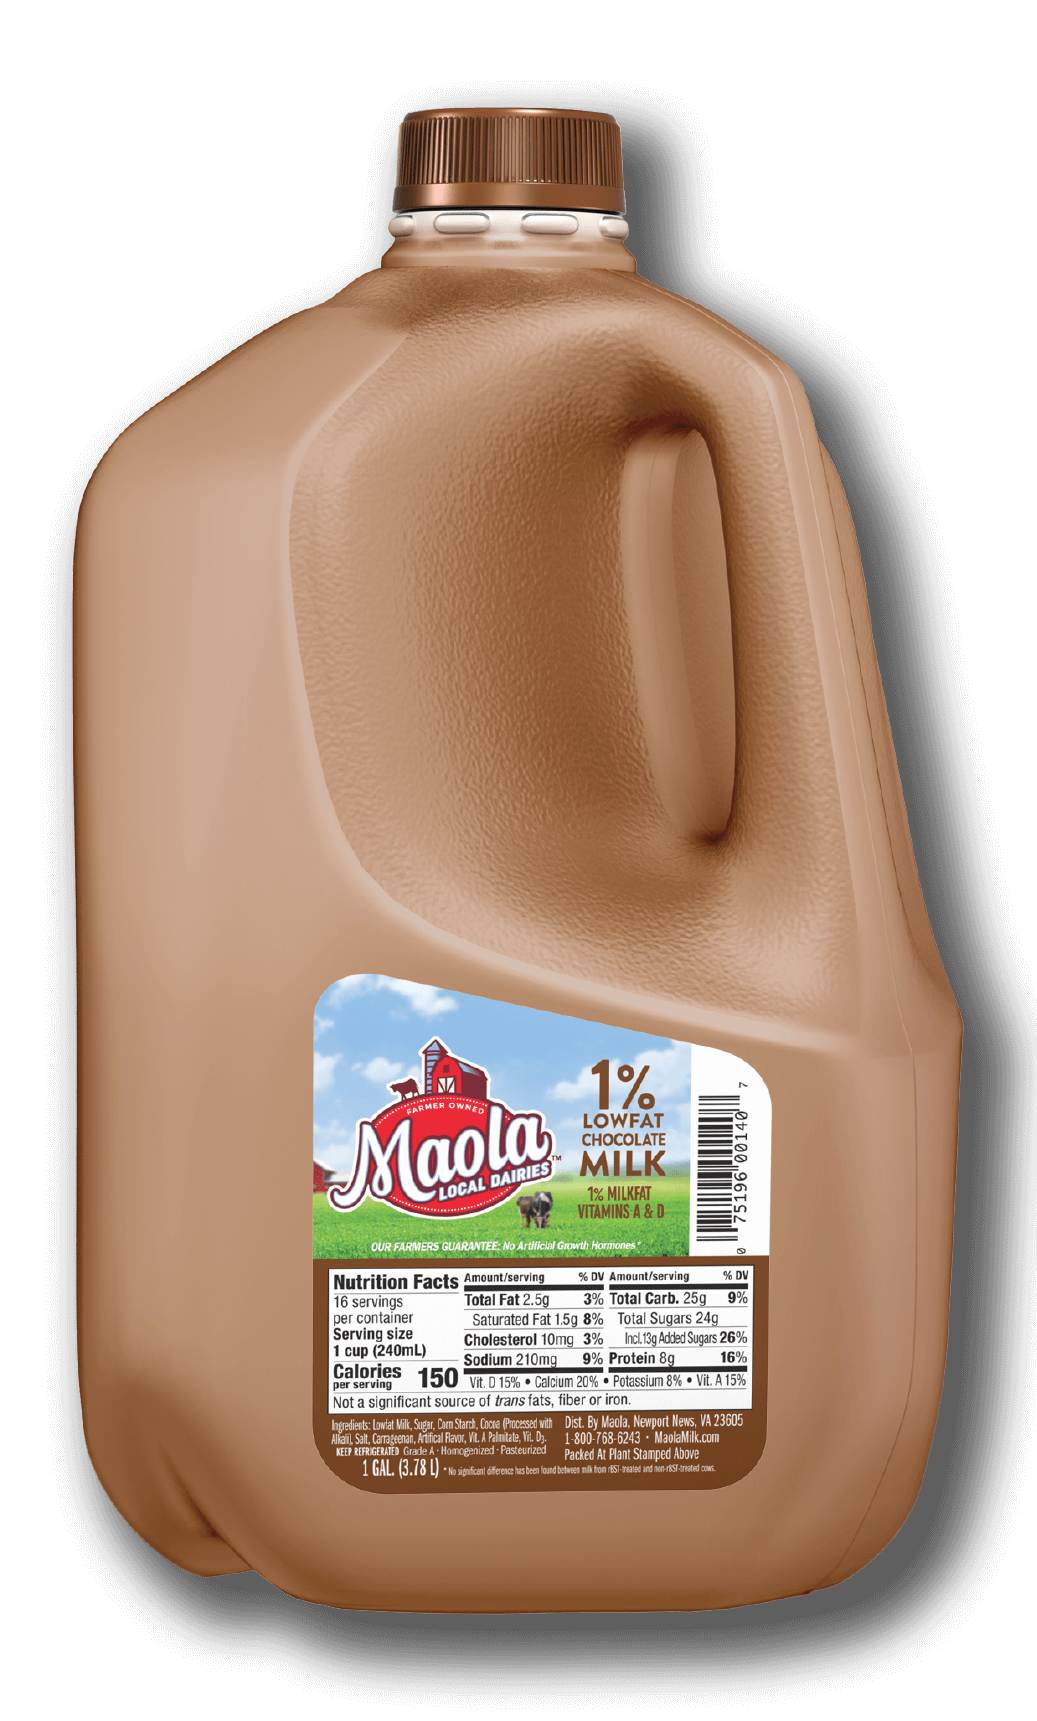 Maola 1% Lowfat Chocolate Milk is available in gallon size.